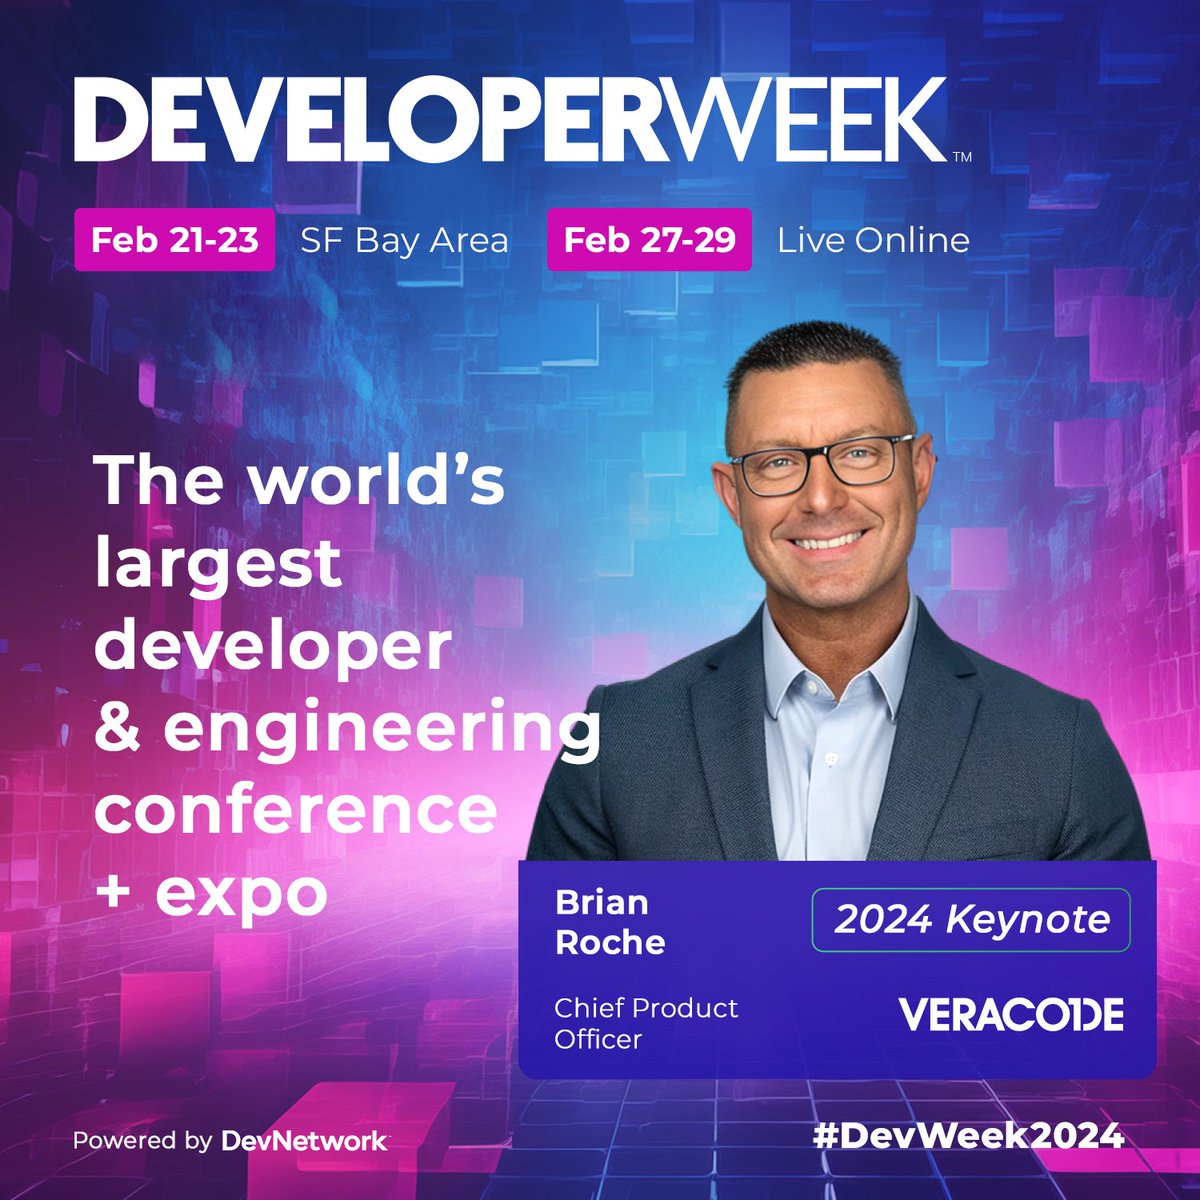 Today is the day! Veracode’s Chief Product Officer, @BrianRocheBos, is holding an insightful keynote session at #DevWeek2024. Don't miss out on this opportunity to gain valuable insights into the intersection of #AI and security. Learn more: bit.ly/4buGTXG.